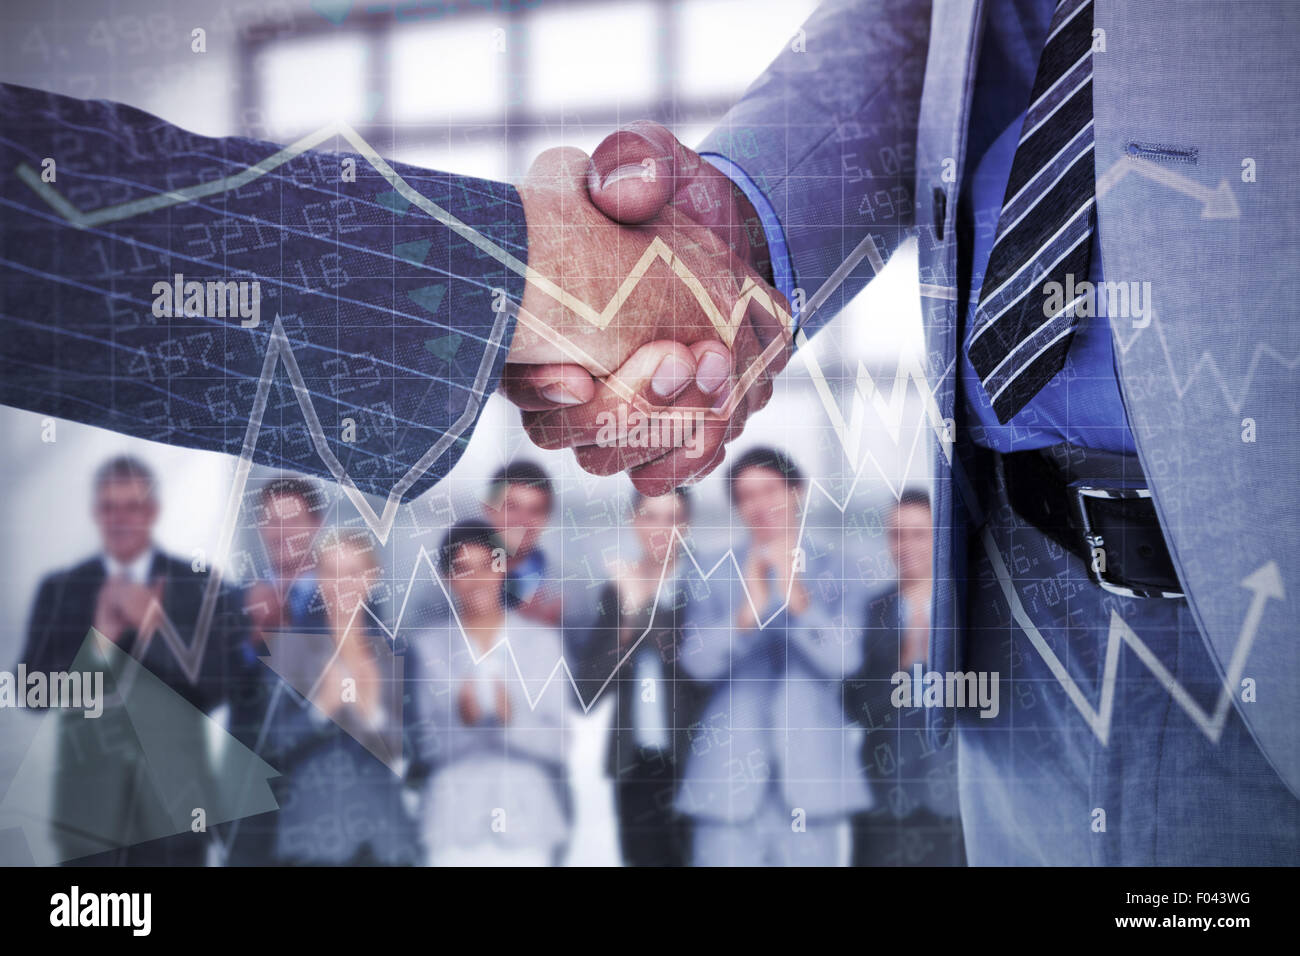 Composite image of  businessman shaking hands with a co worker Stock Photo